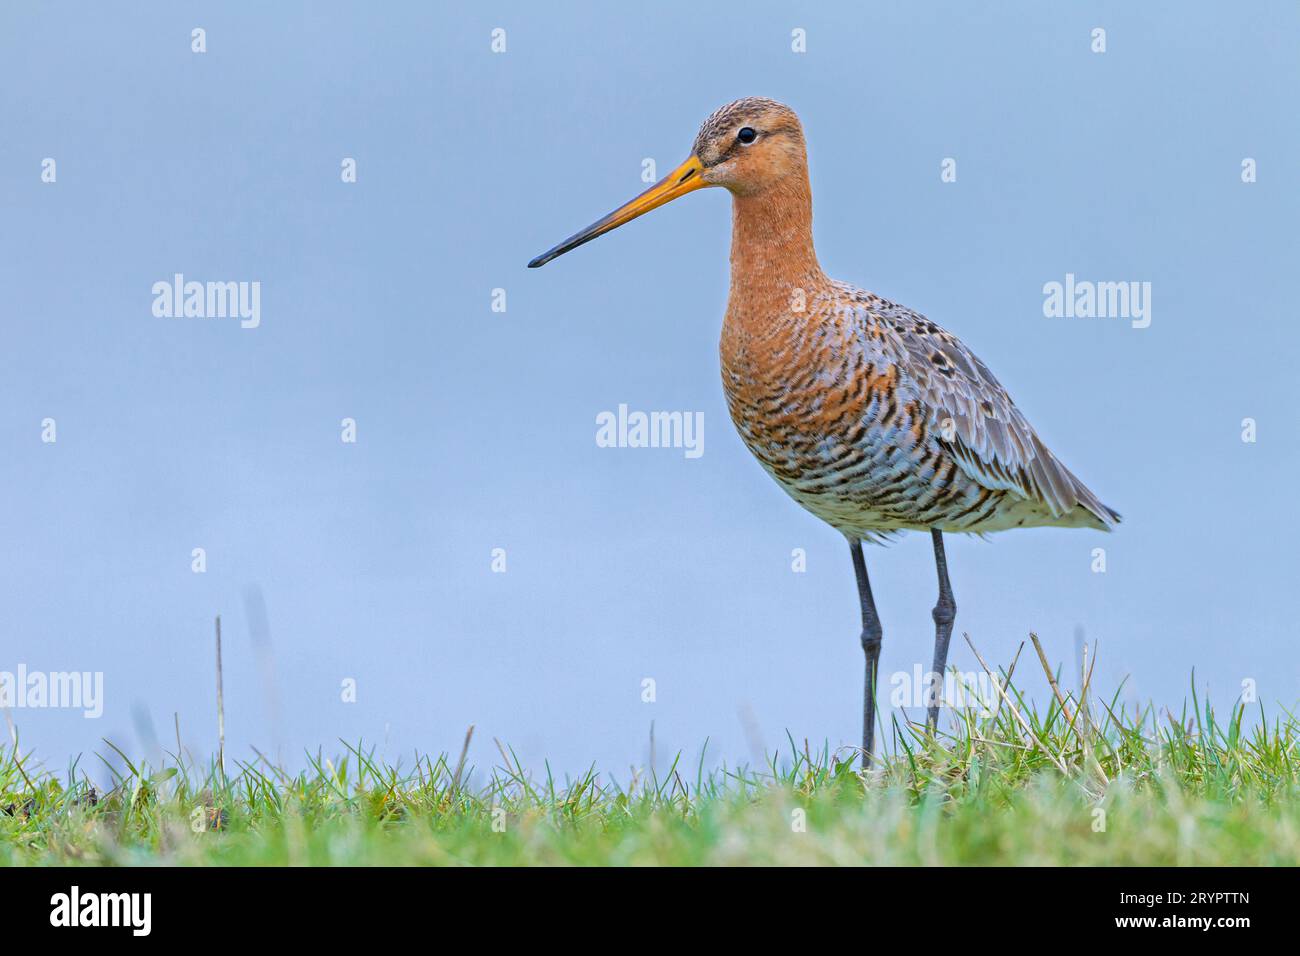 Black-tailed Godwit (Limosa limosa). Adult standing in grass. Germany Stock Photo